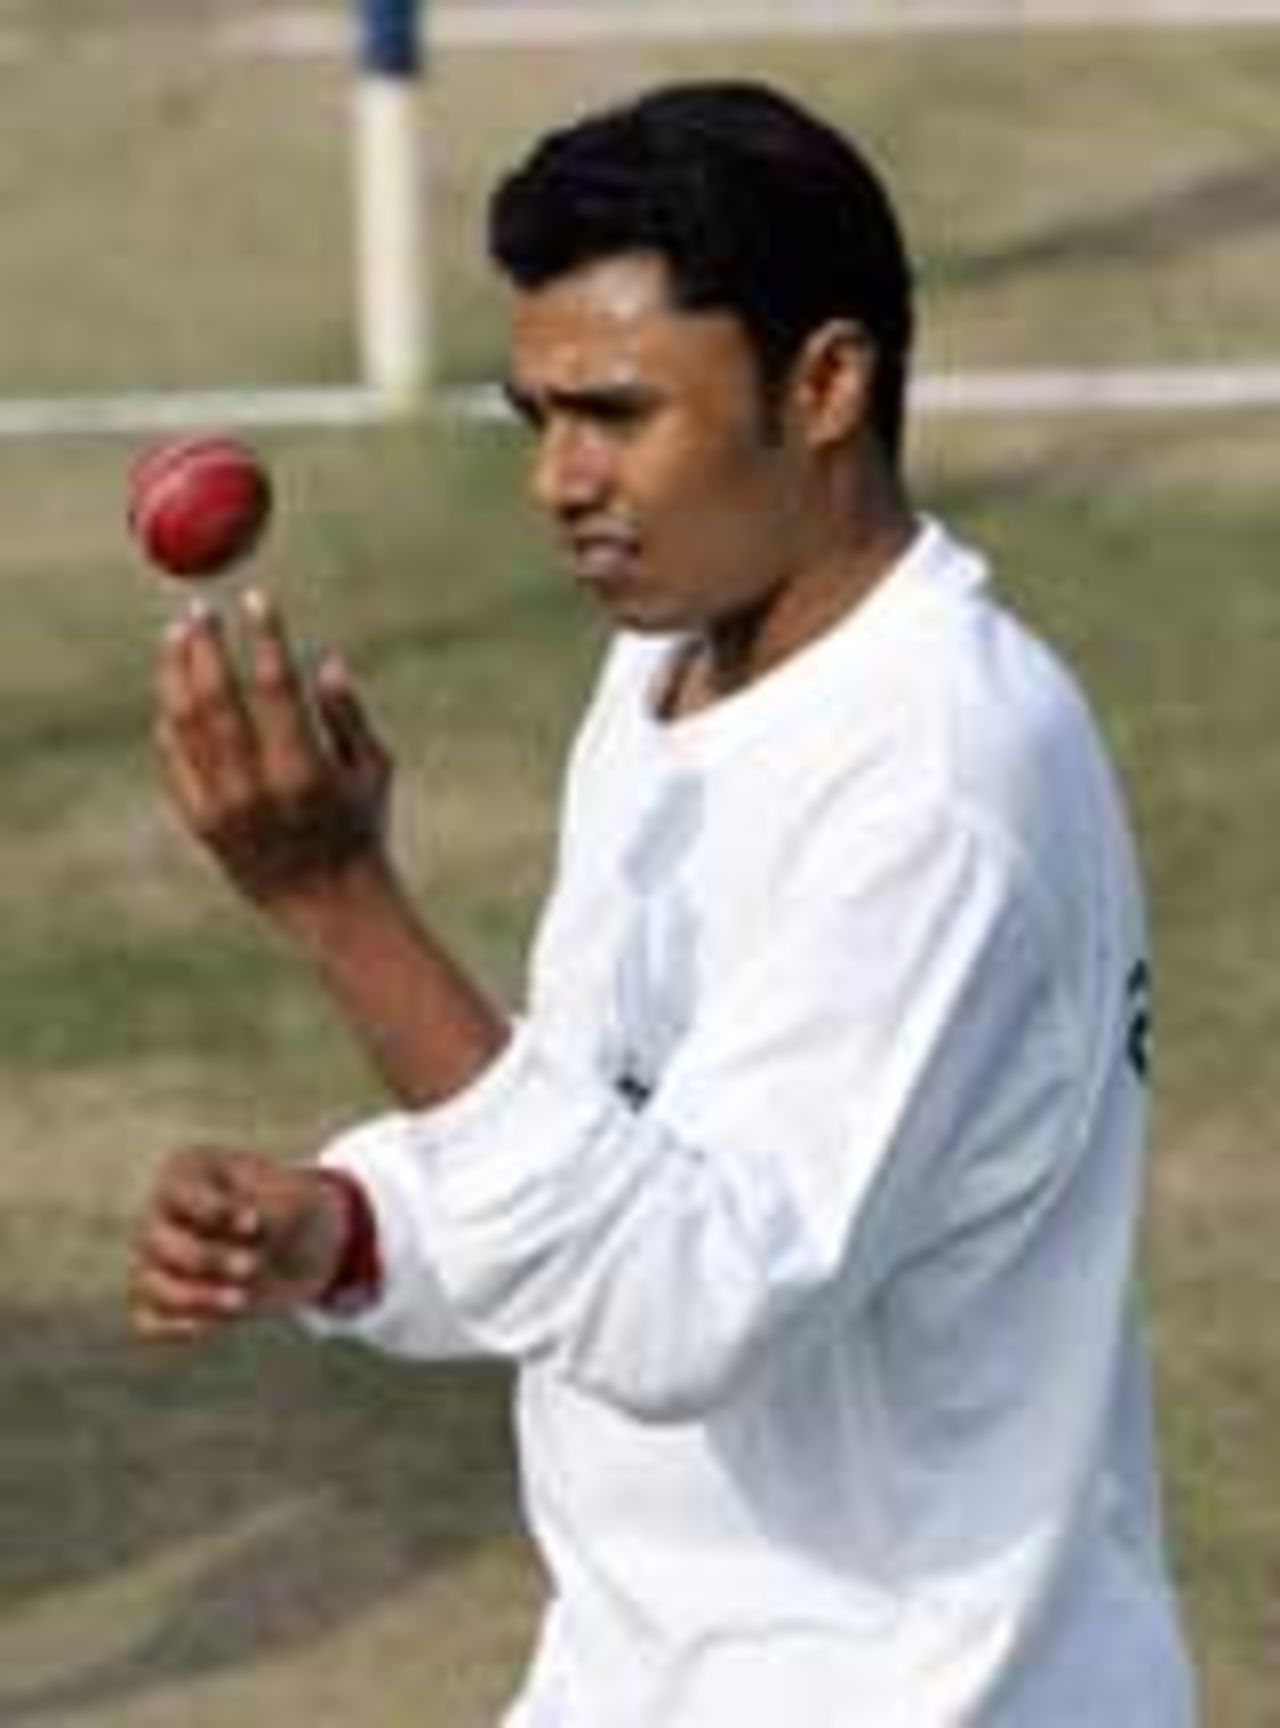 Danish Kaneria twirls the ball at practice ahead of the 1st Test against India, March 7, 2005